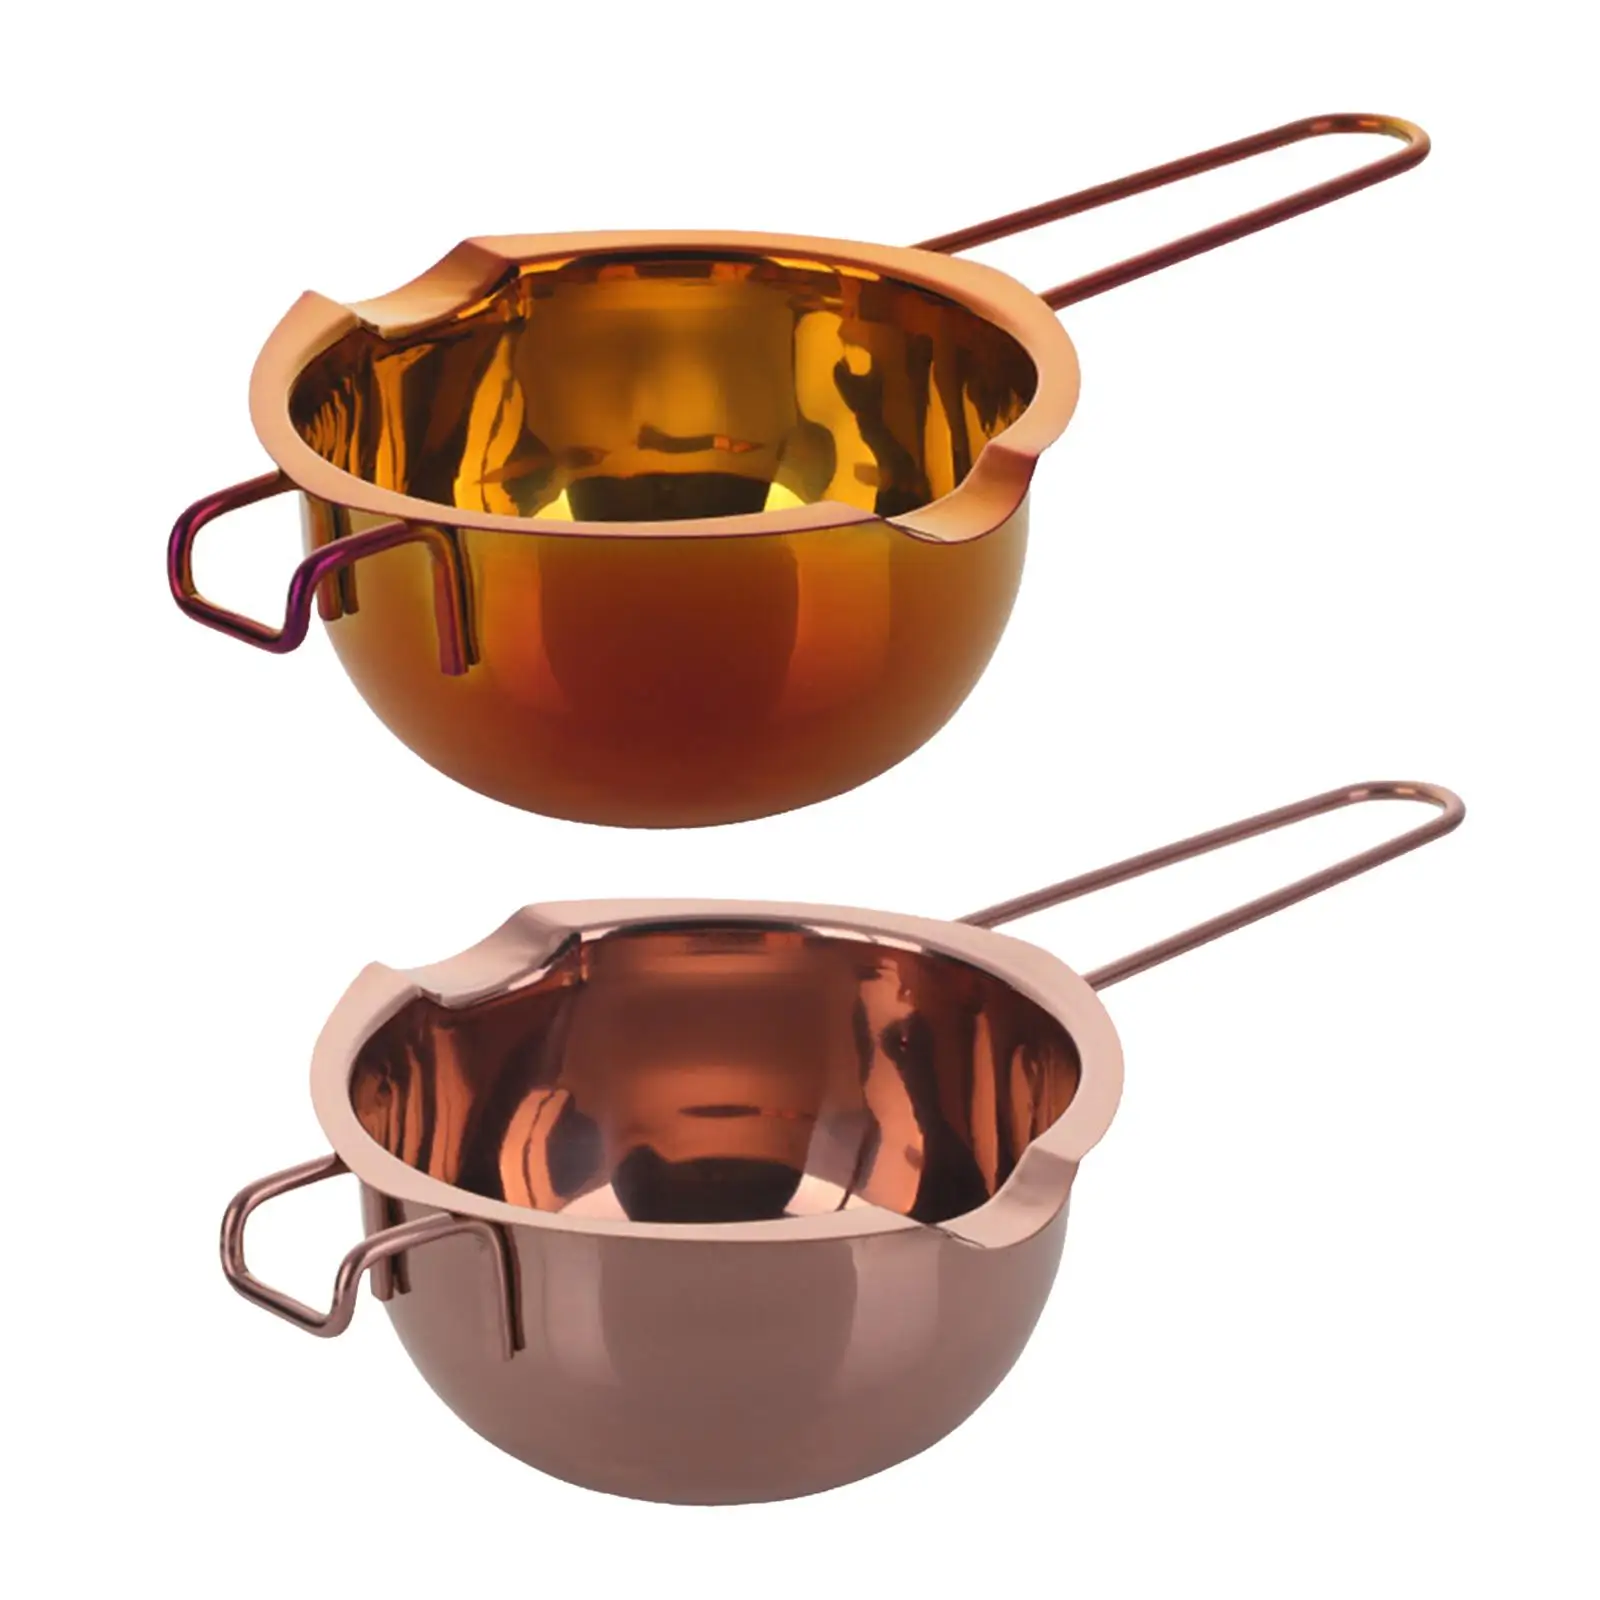 400ml Stainless Steel Double Boiler Pot for Melting Chocolate, Candy, Candle Use and Clean Easily ,Flat Bottom Long Durability